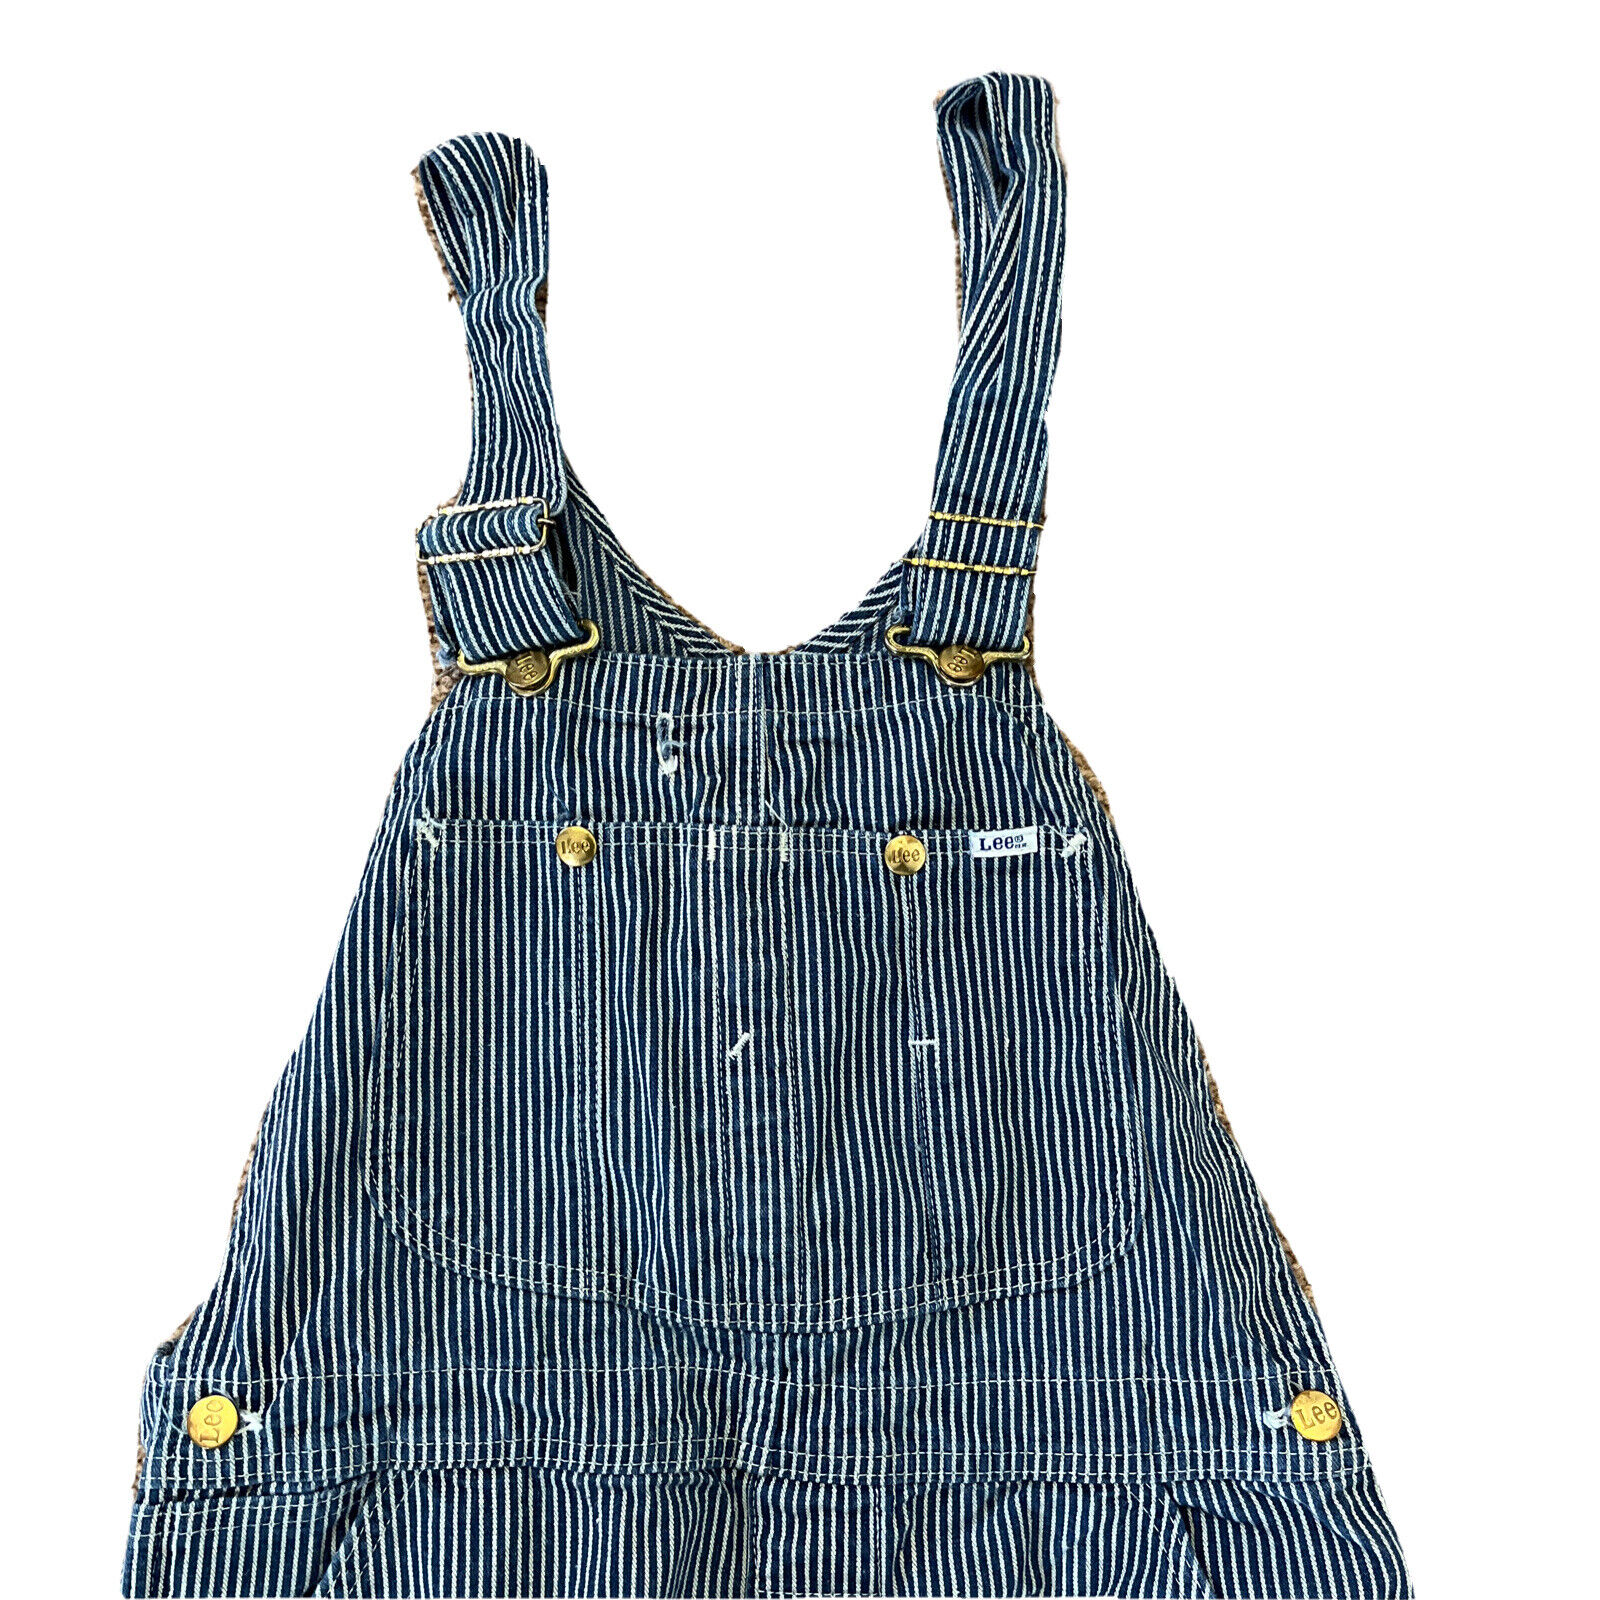 Vintage LEE Sanforized Union Made Hickory Stripe Overalls Made In The USA